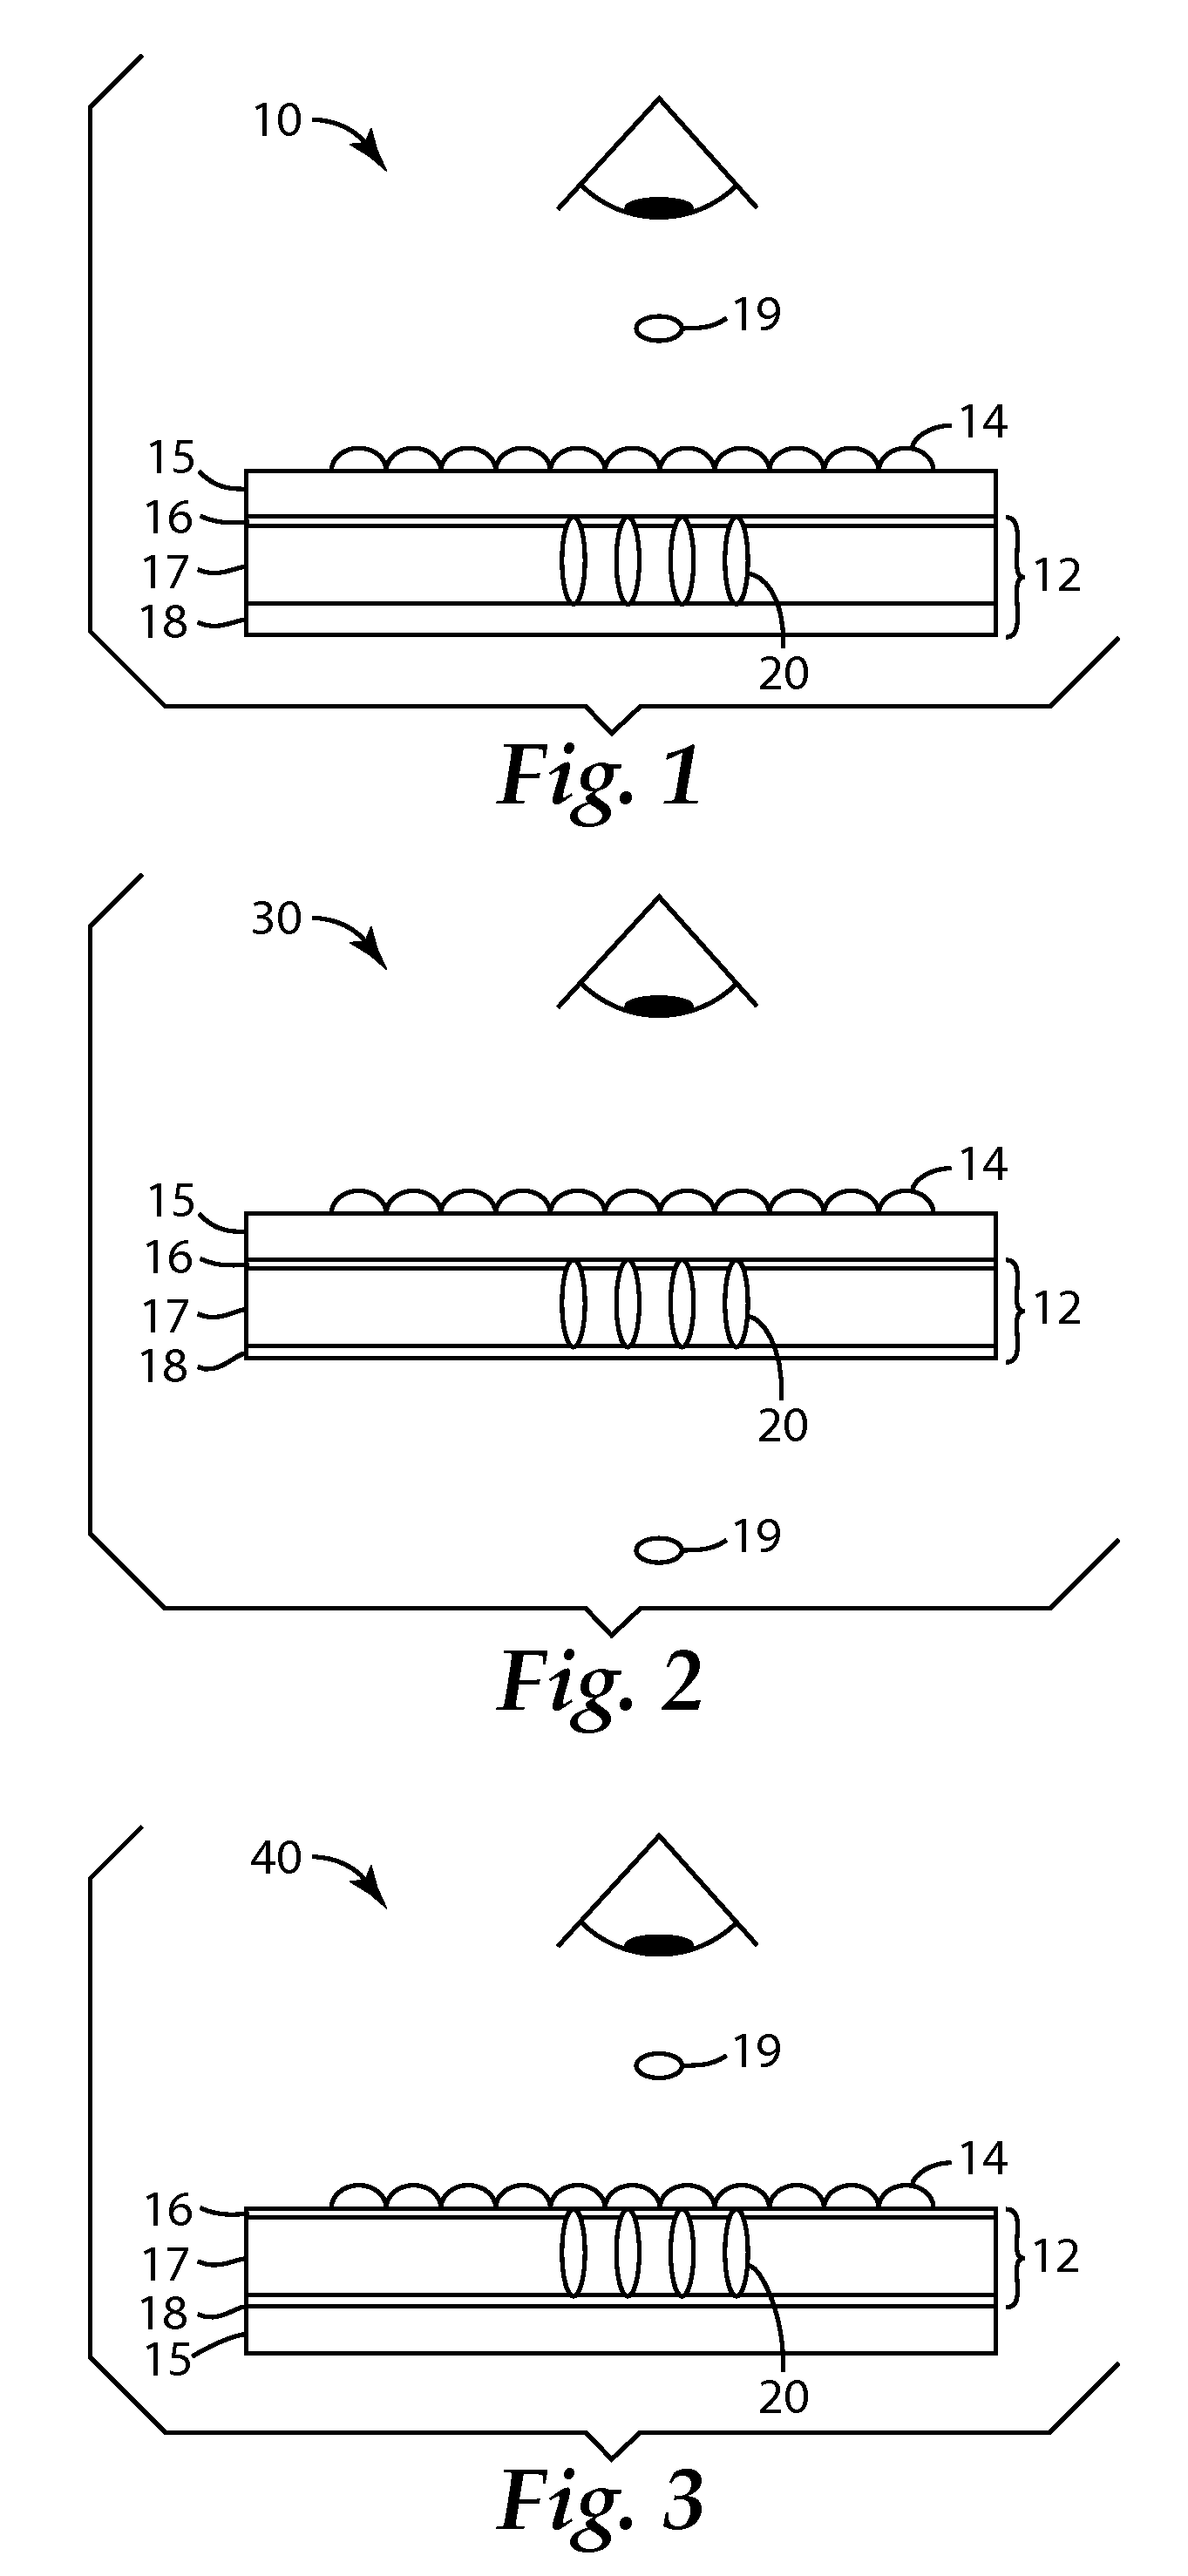 Interference films having acrylamide layer and method of making same